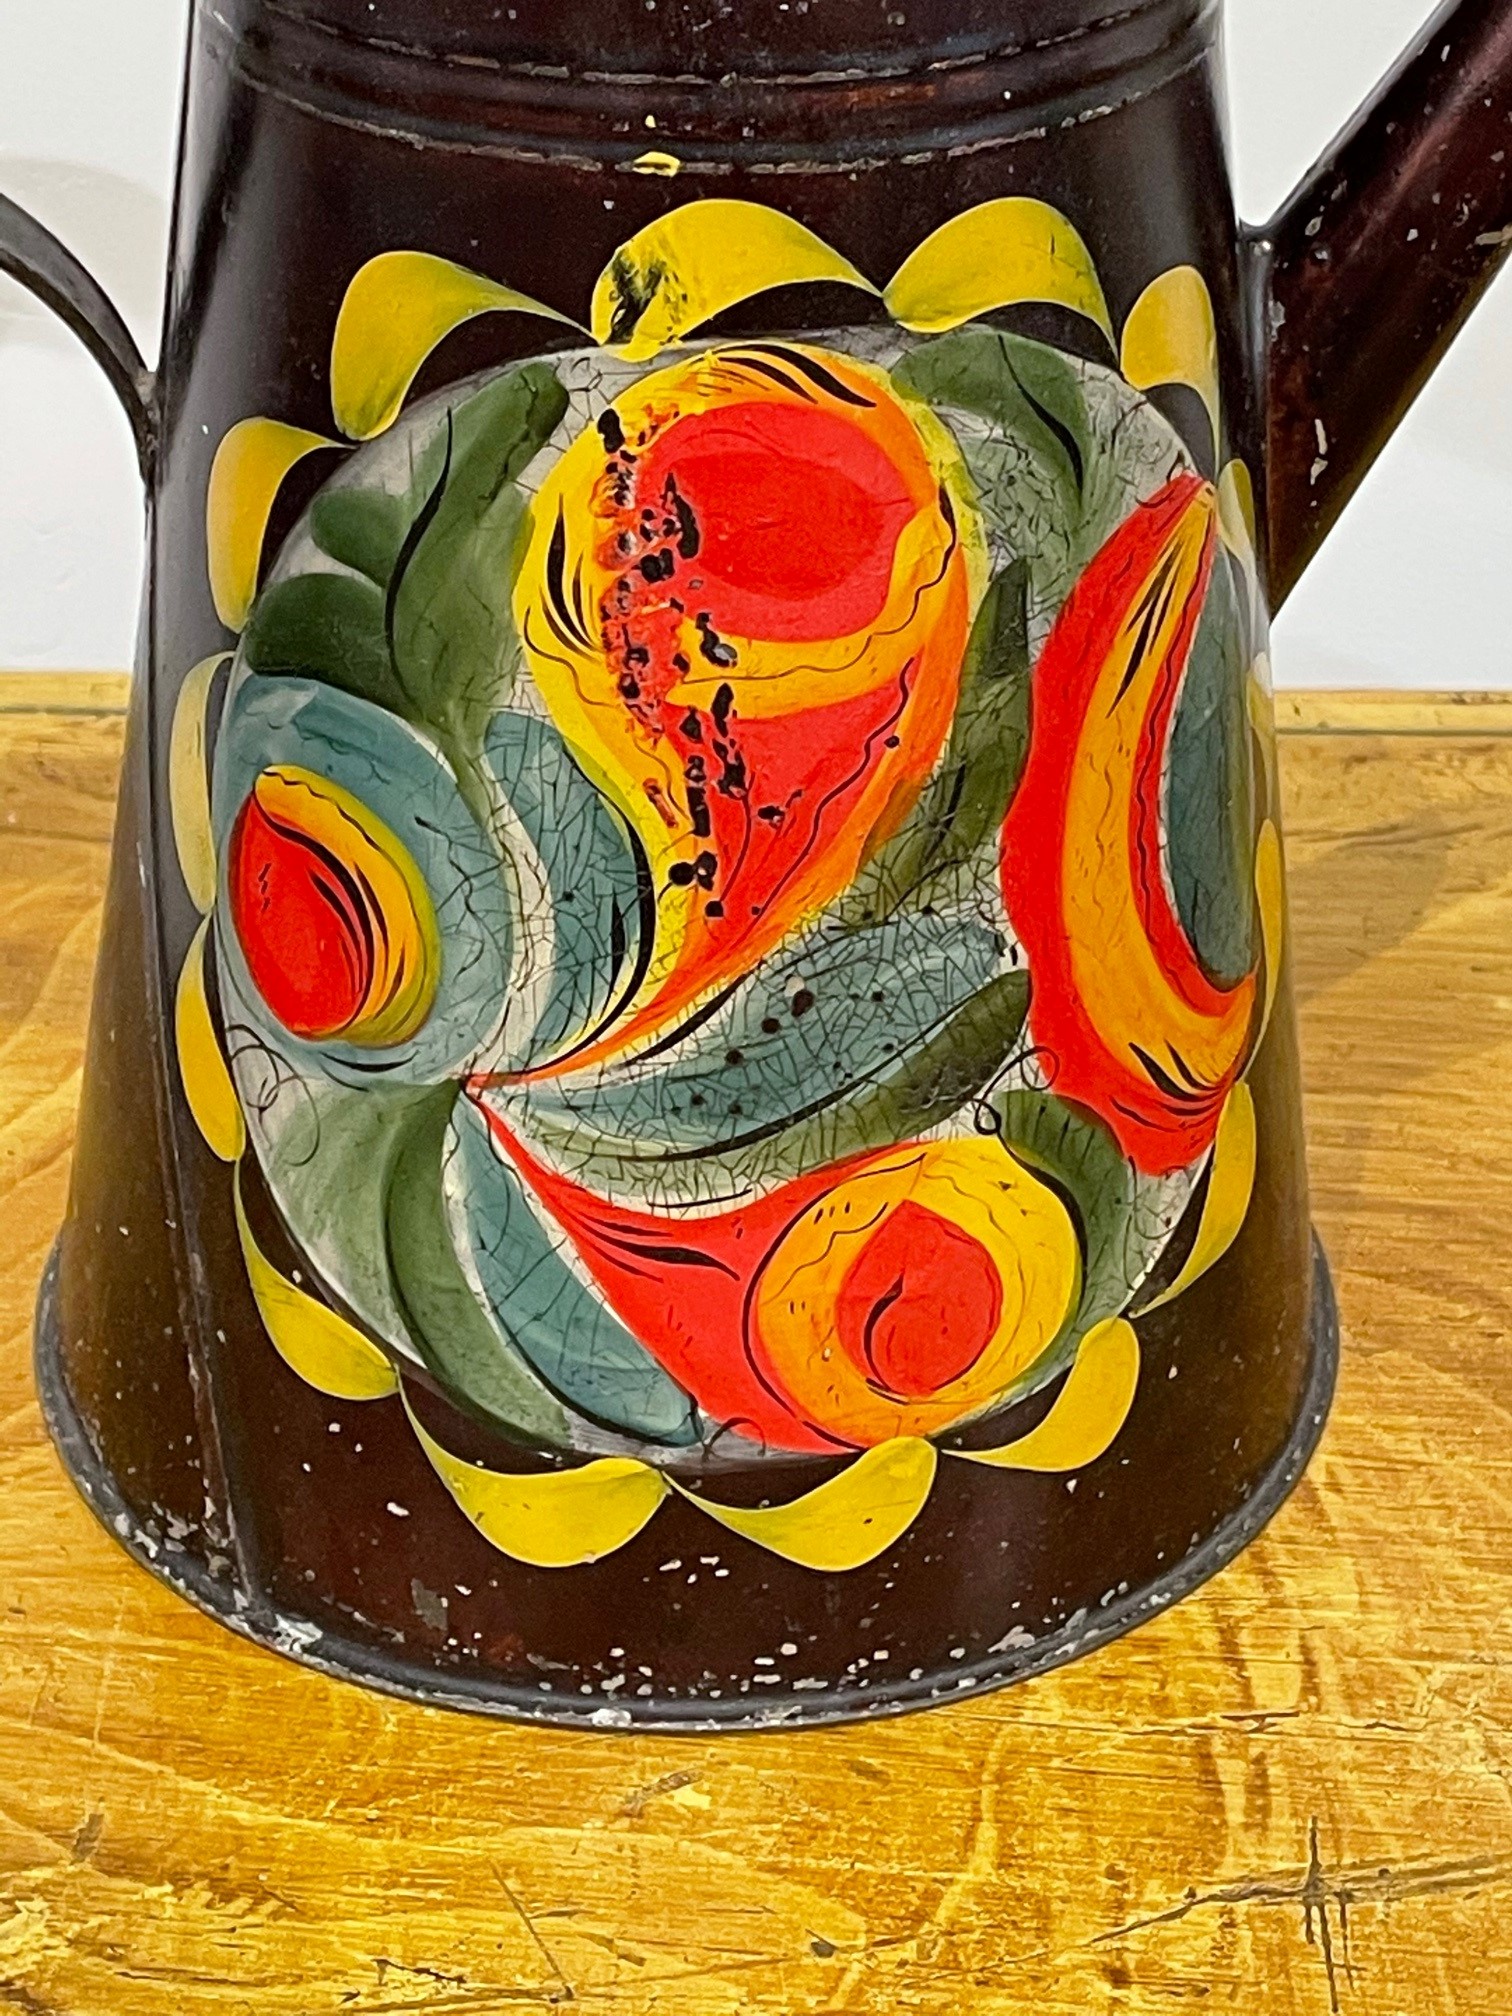 painted toleware coffee pot rel=